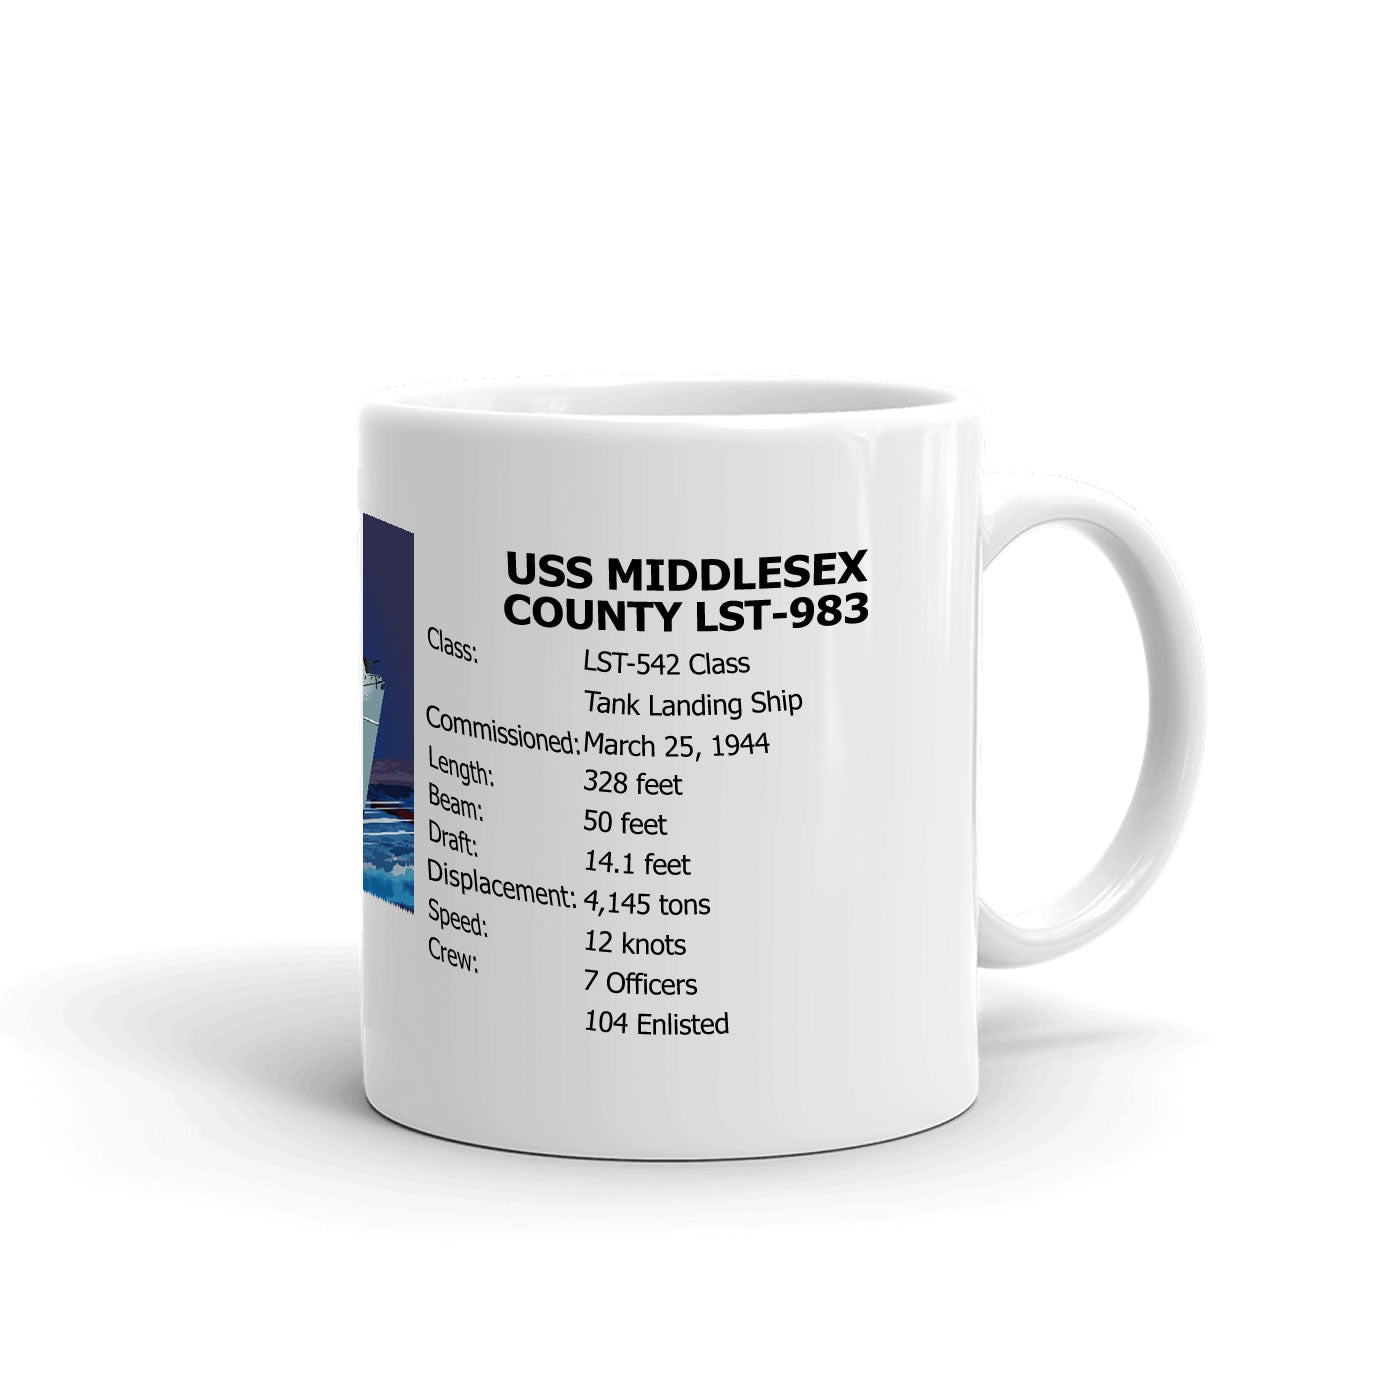 USS Middlesex County LST-983 Coffee Cup Mug Right Handle